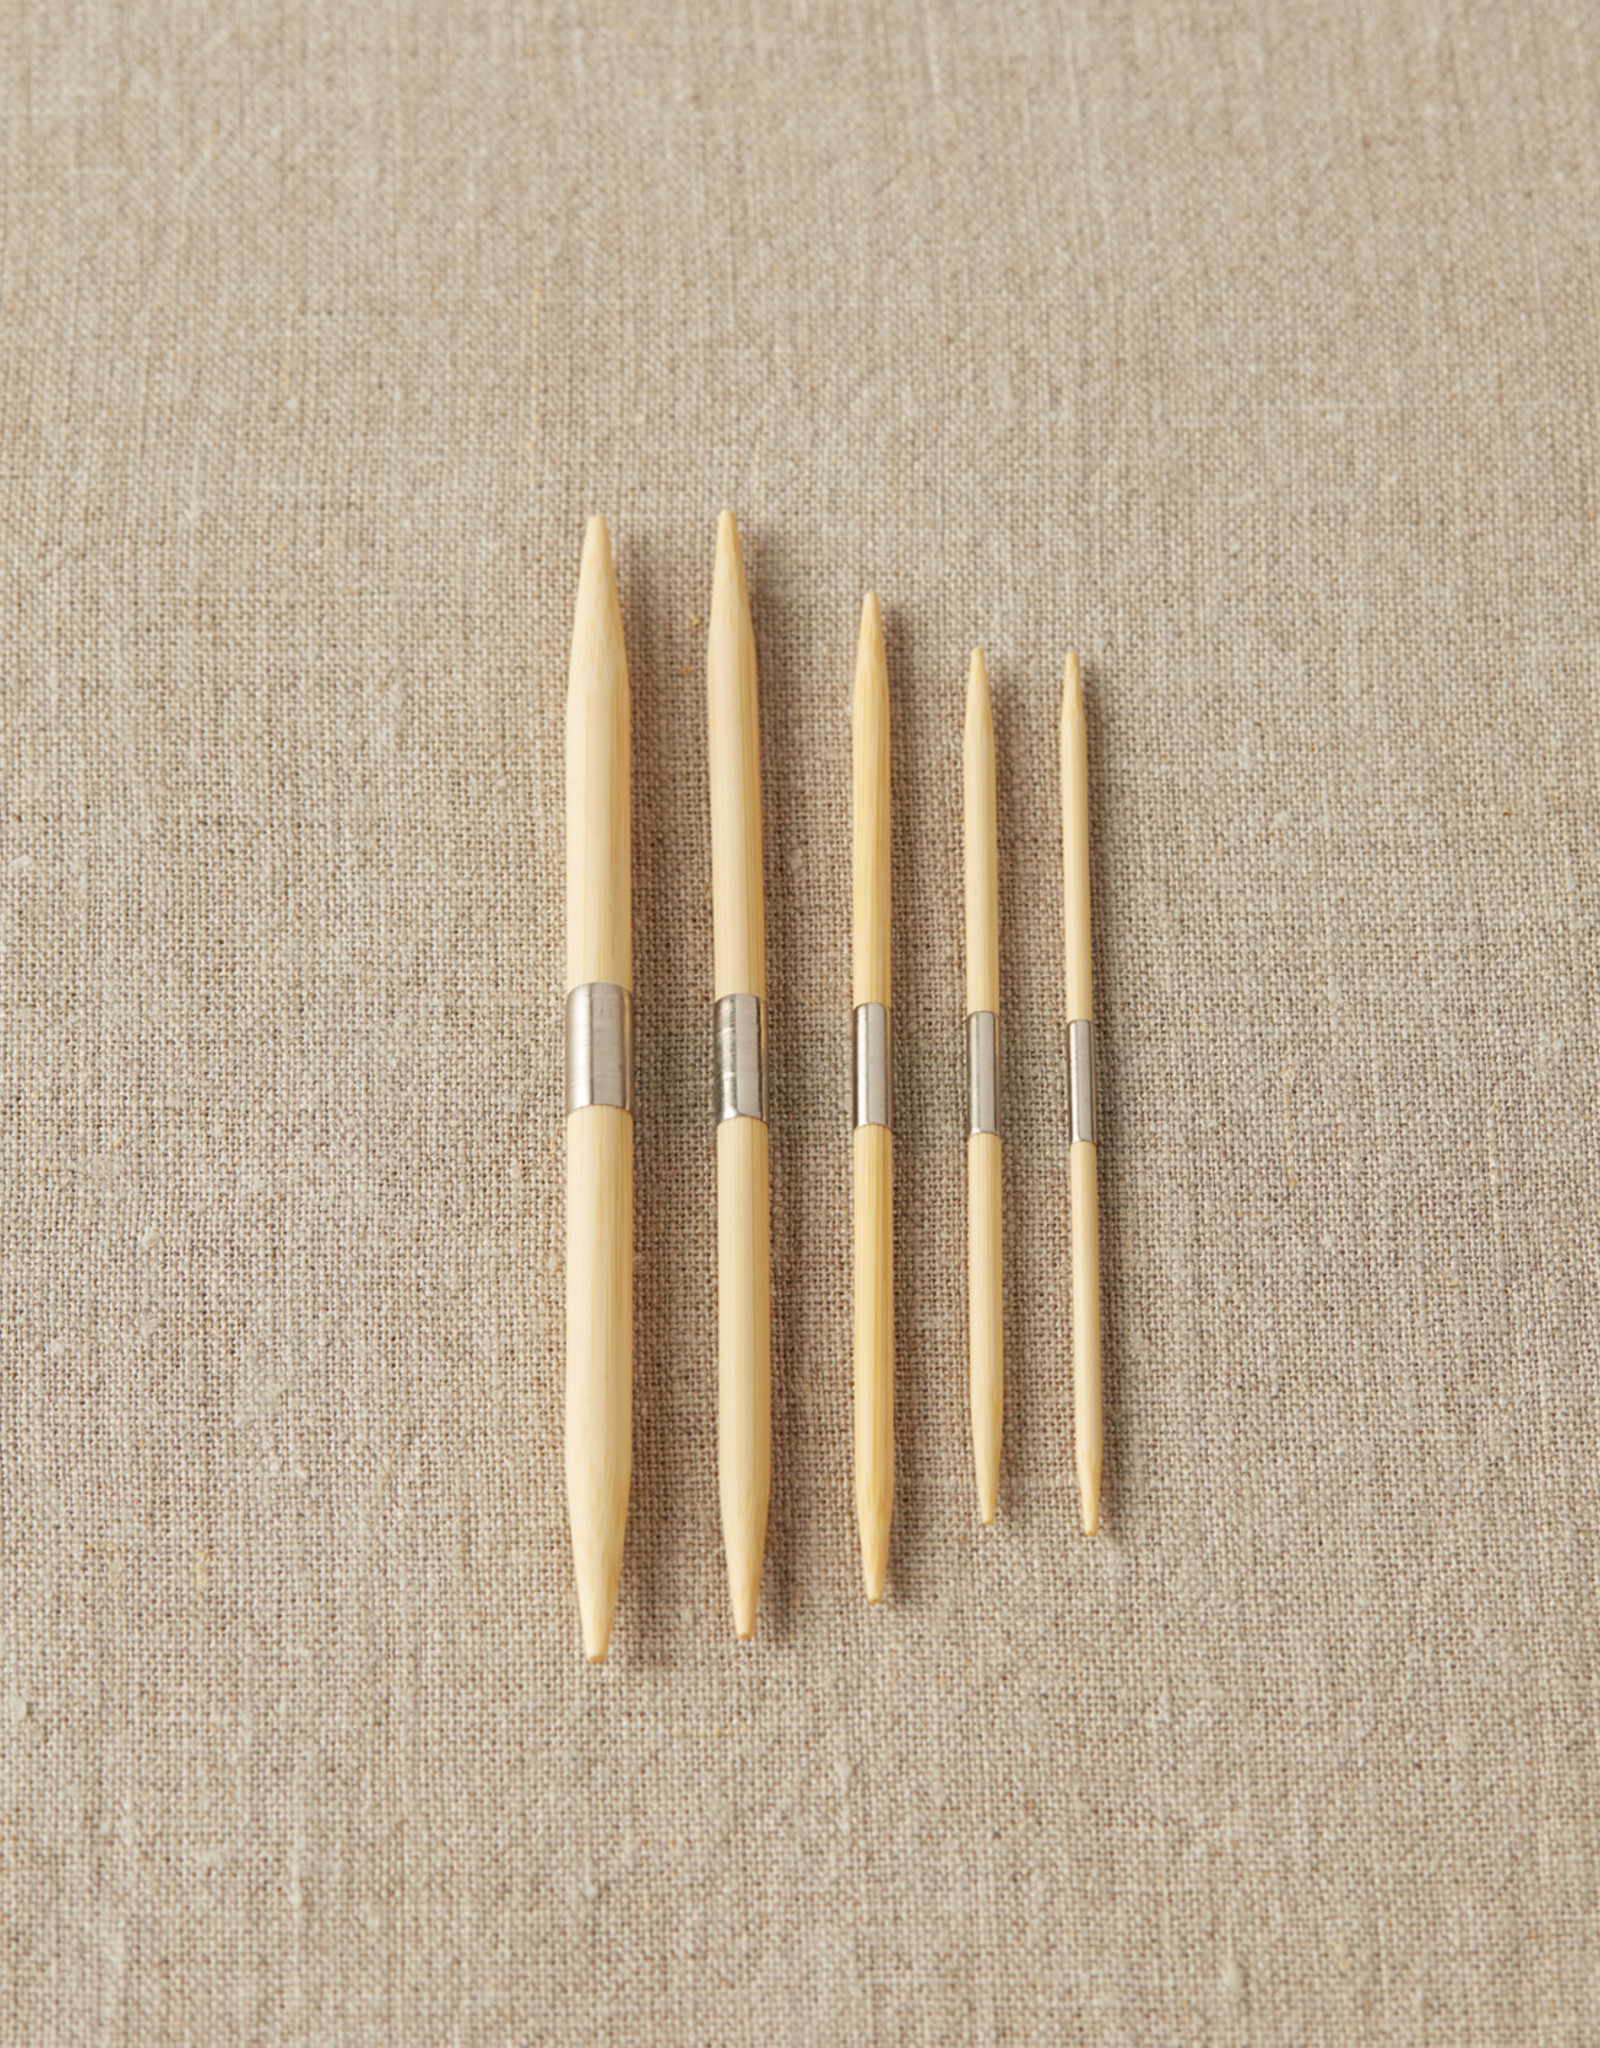 Cocoknits Bamboo Cable needles